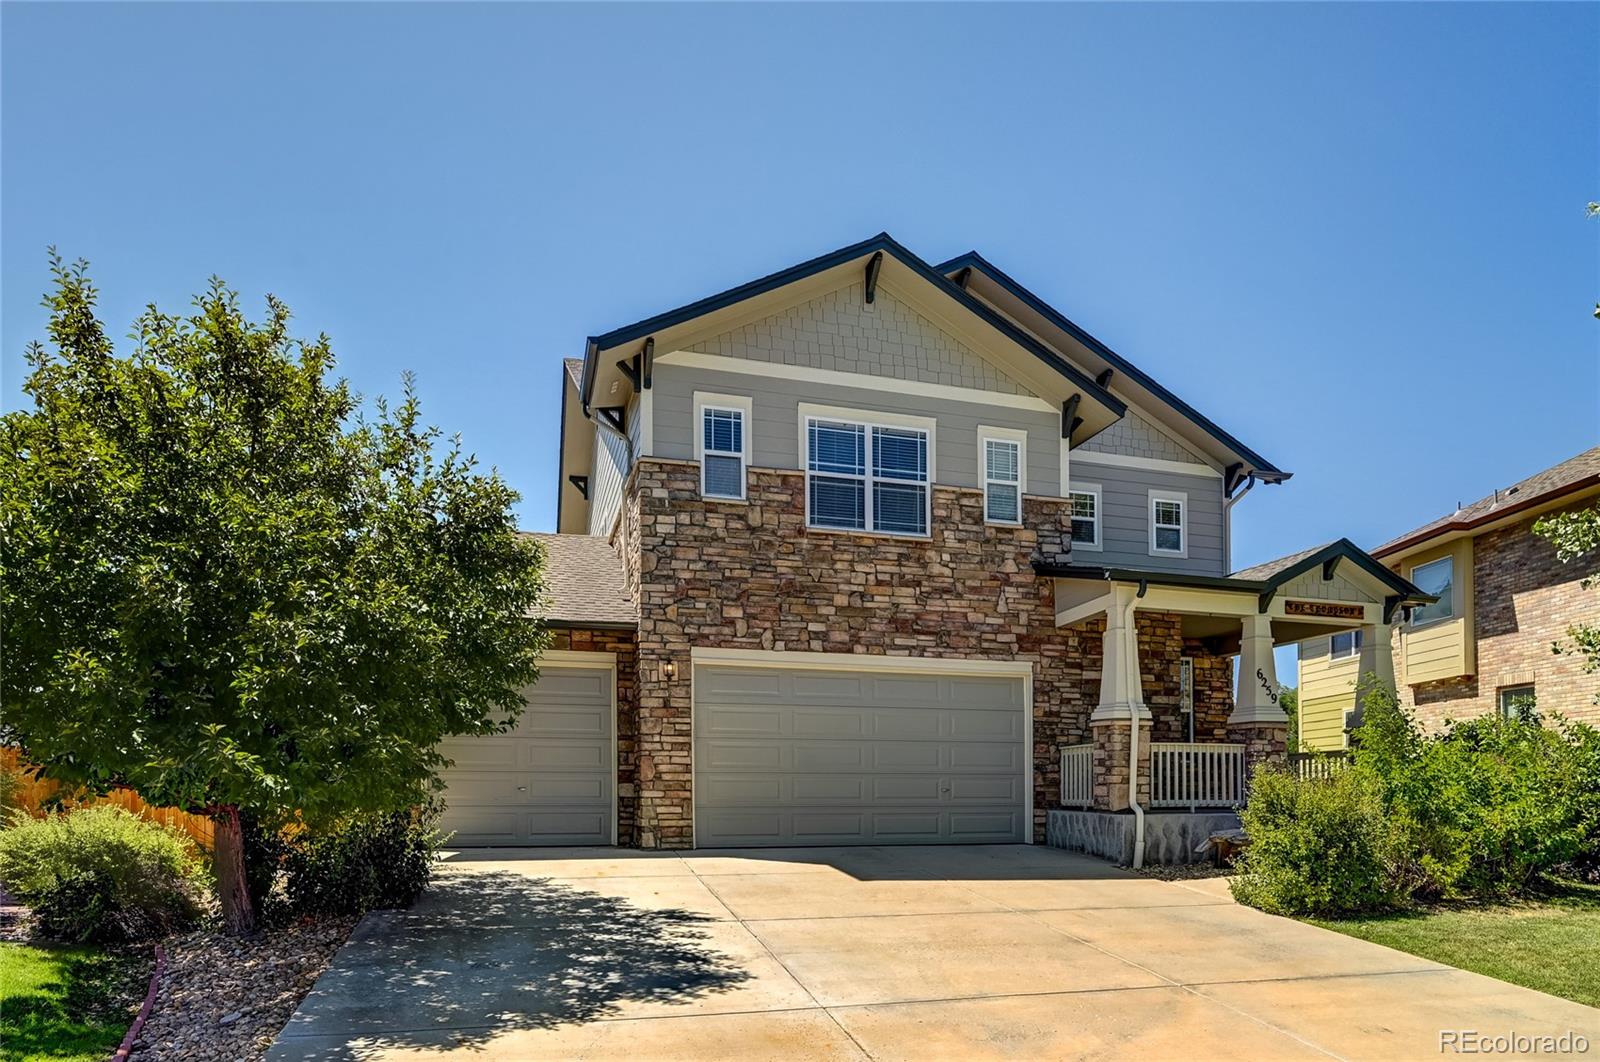 6259 s jamestown court, Aurora sold home. Closed on 2024-03-29 for $716,000.